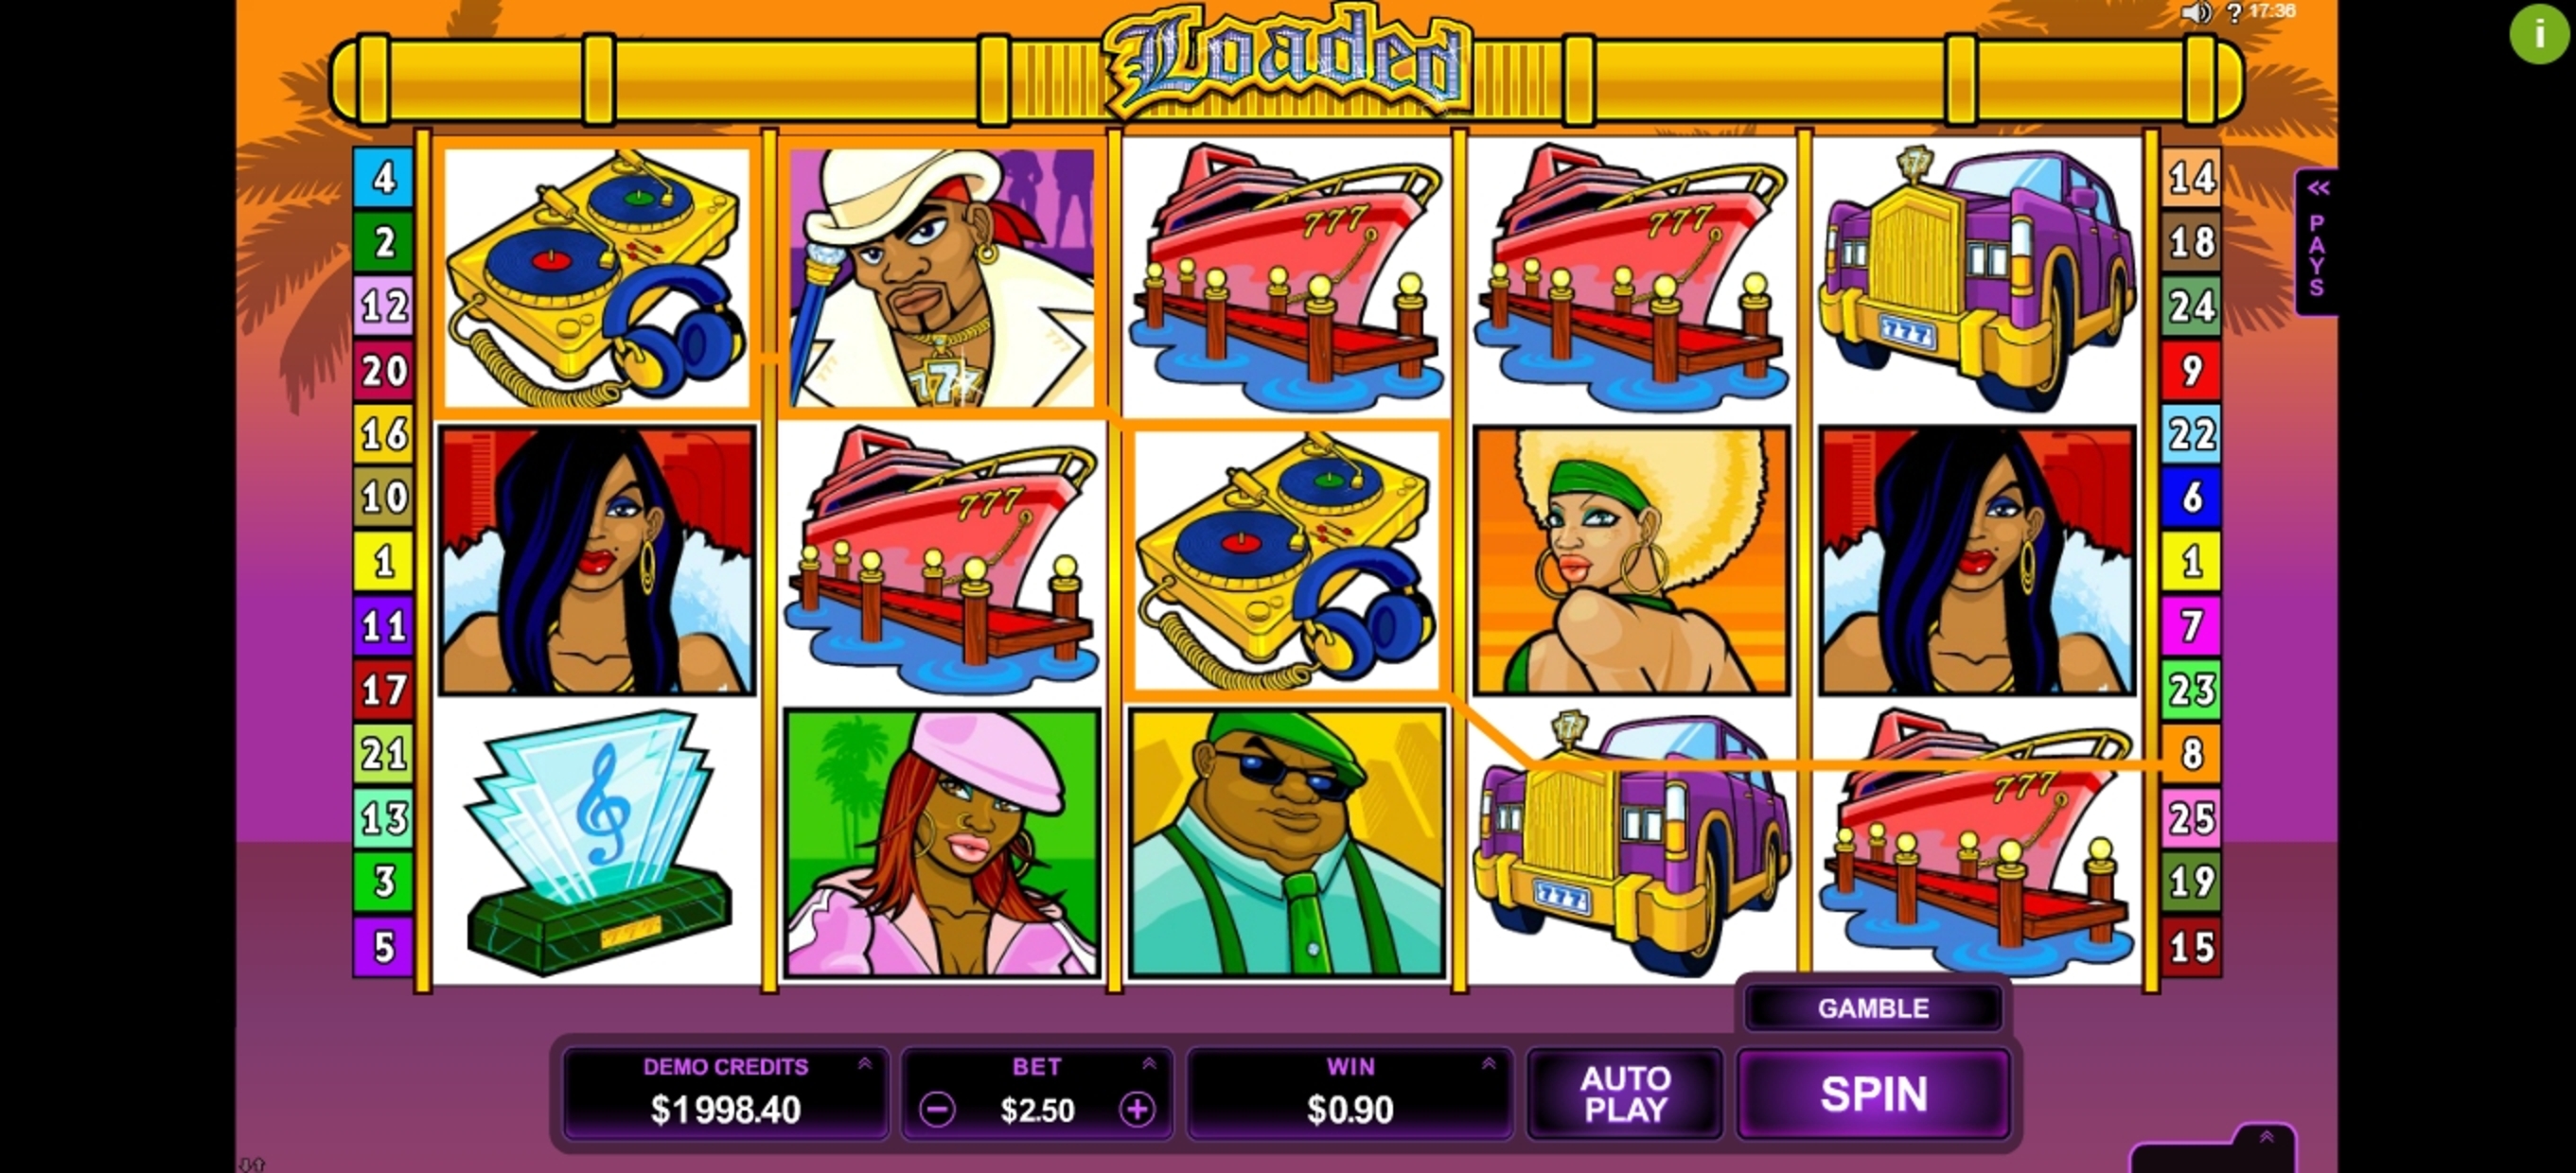 Win Money in Loaded Free Slot Game by Microgaming